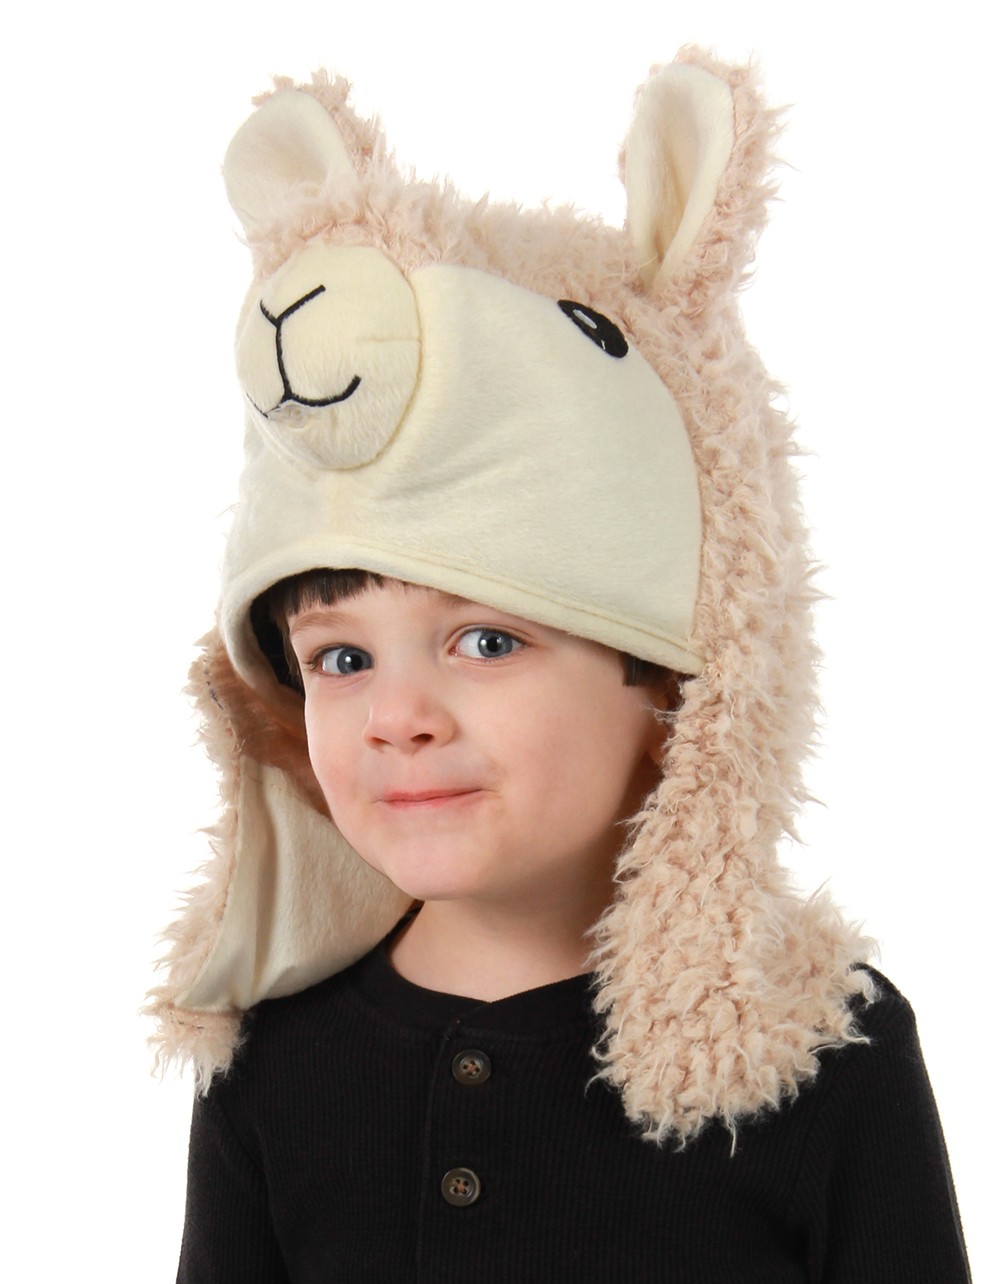 Spitting Llama Sprazy Toy Hat - Plush fits most kids and adults